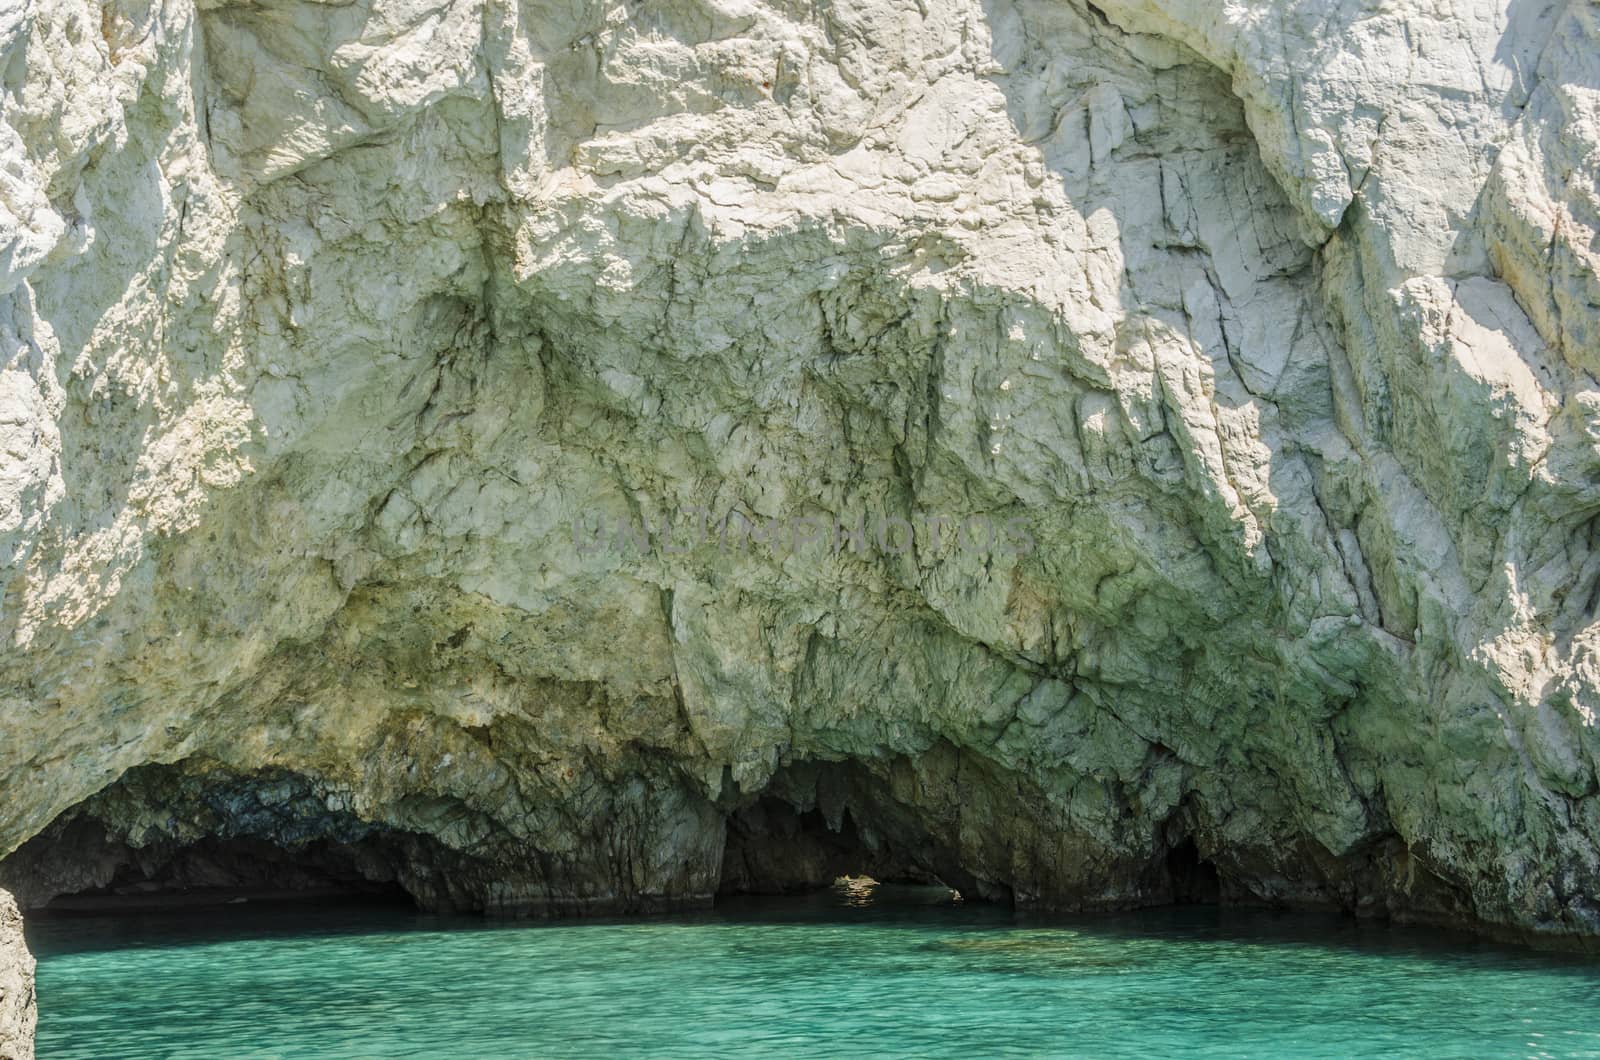 set of caves on the shores of the island of Zakynthos in the Ionian Sea